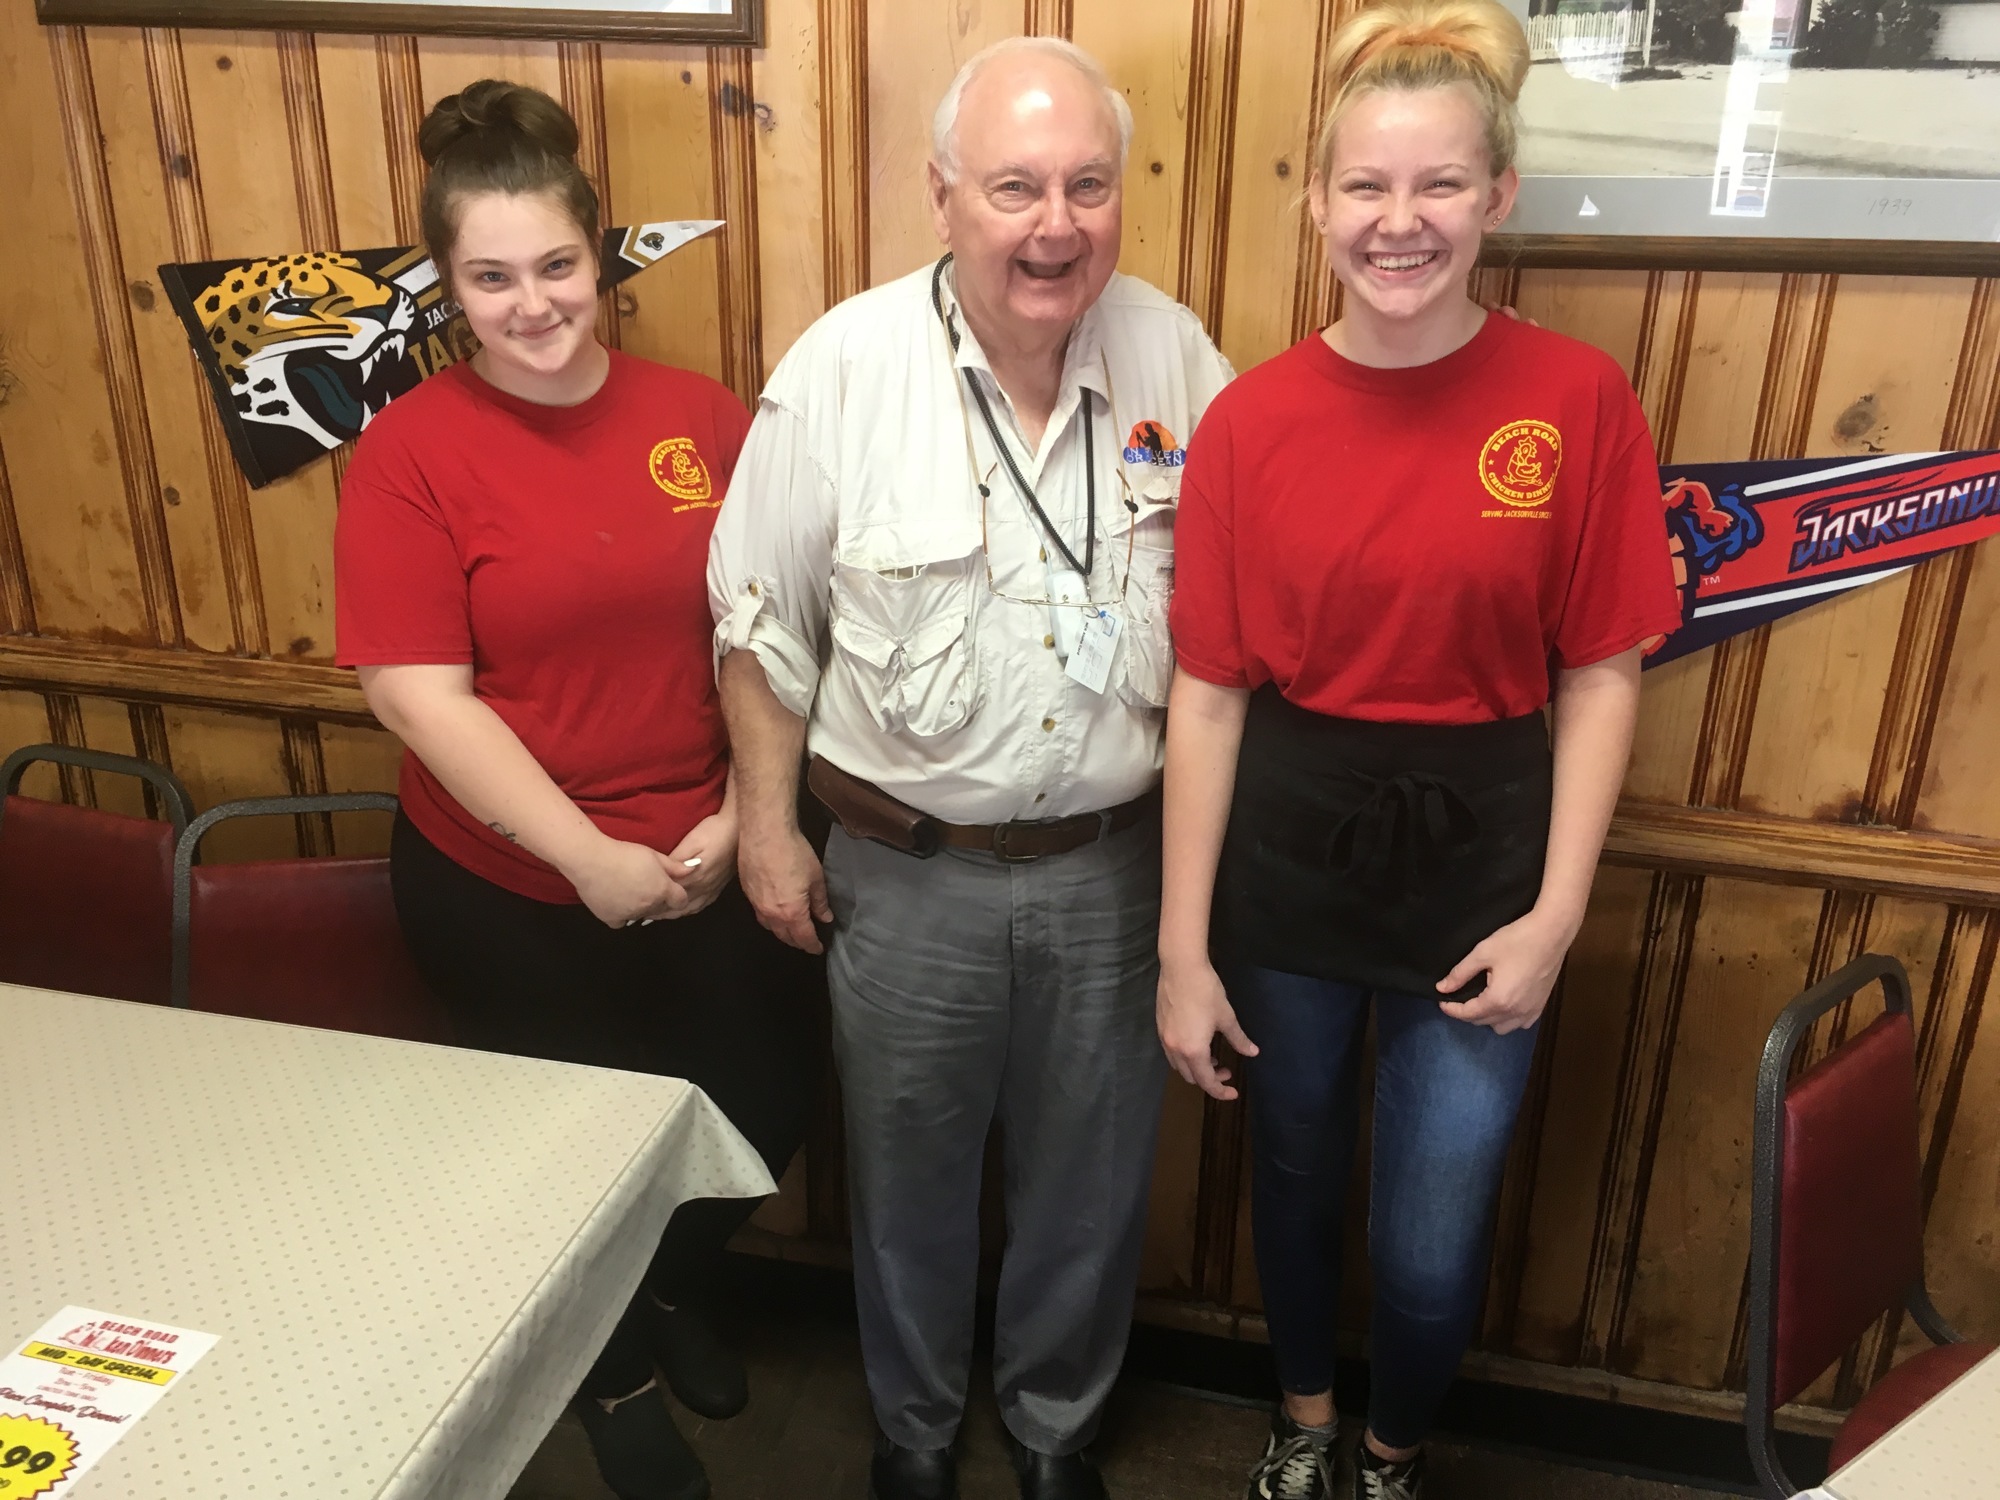 Kenneth Ferger with waitresses (left) Krista Lynch and Alysha Lynch. The women are sisters.